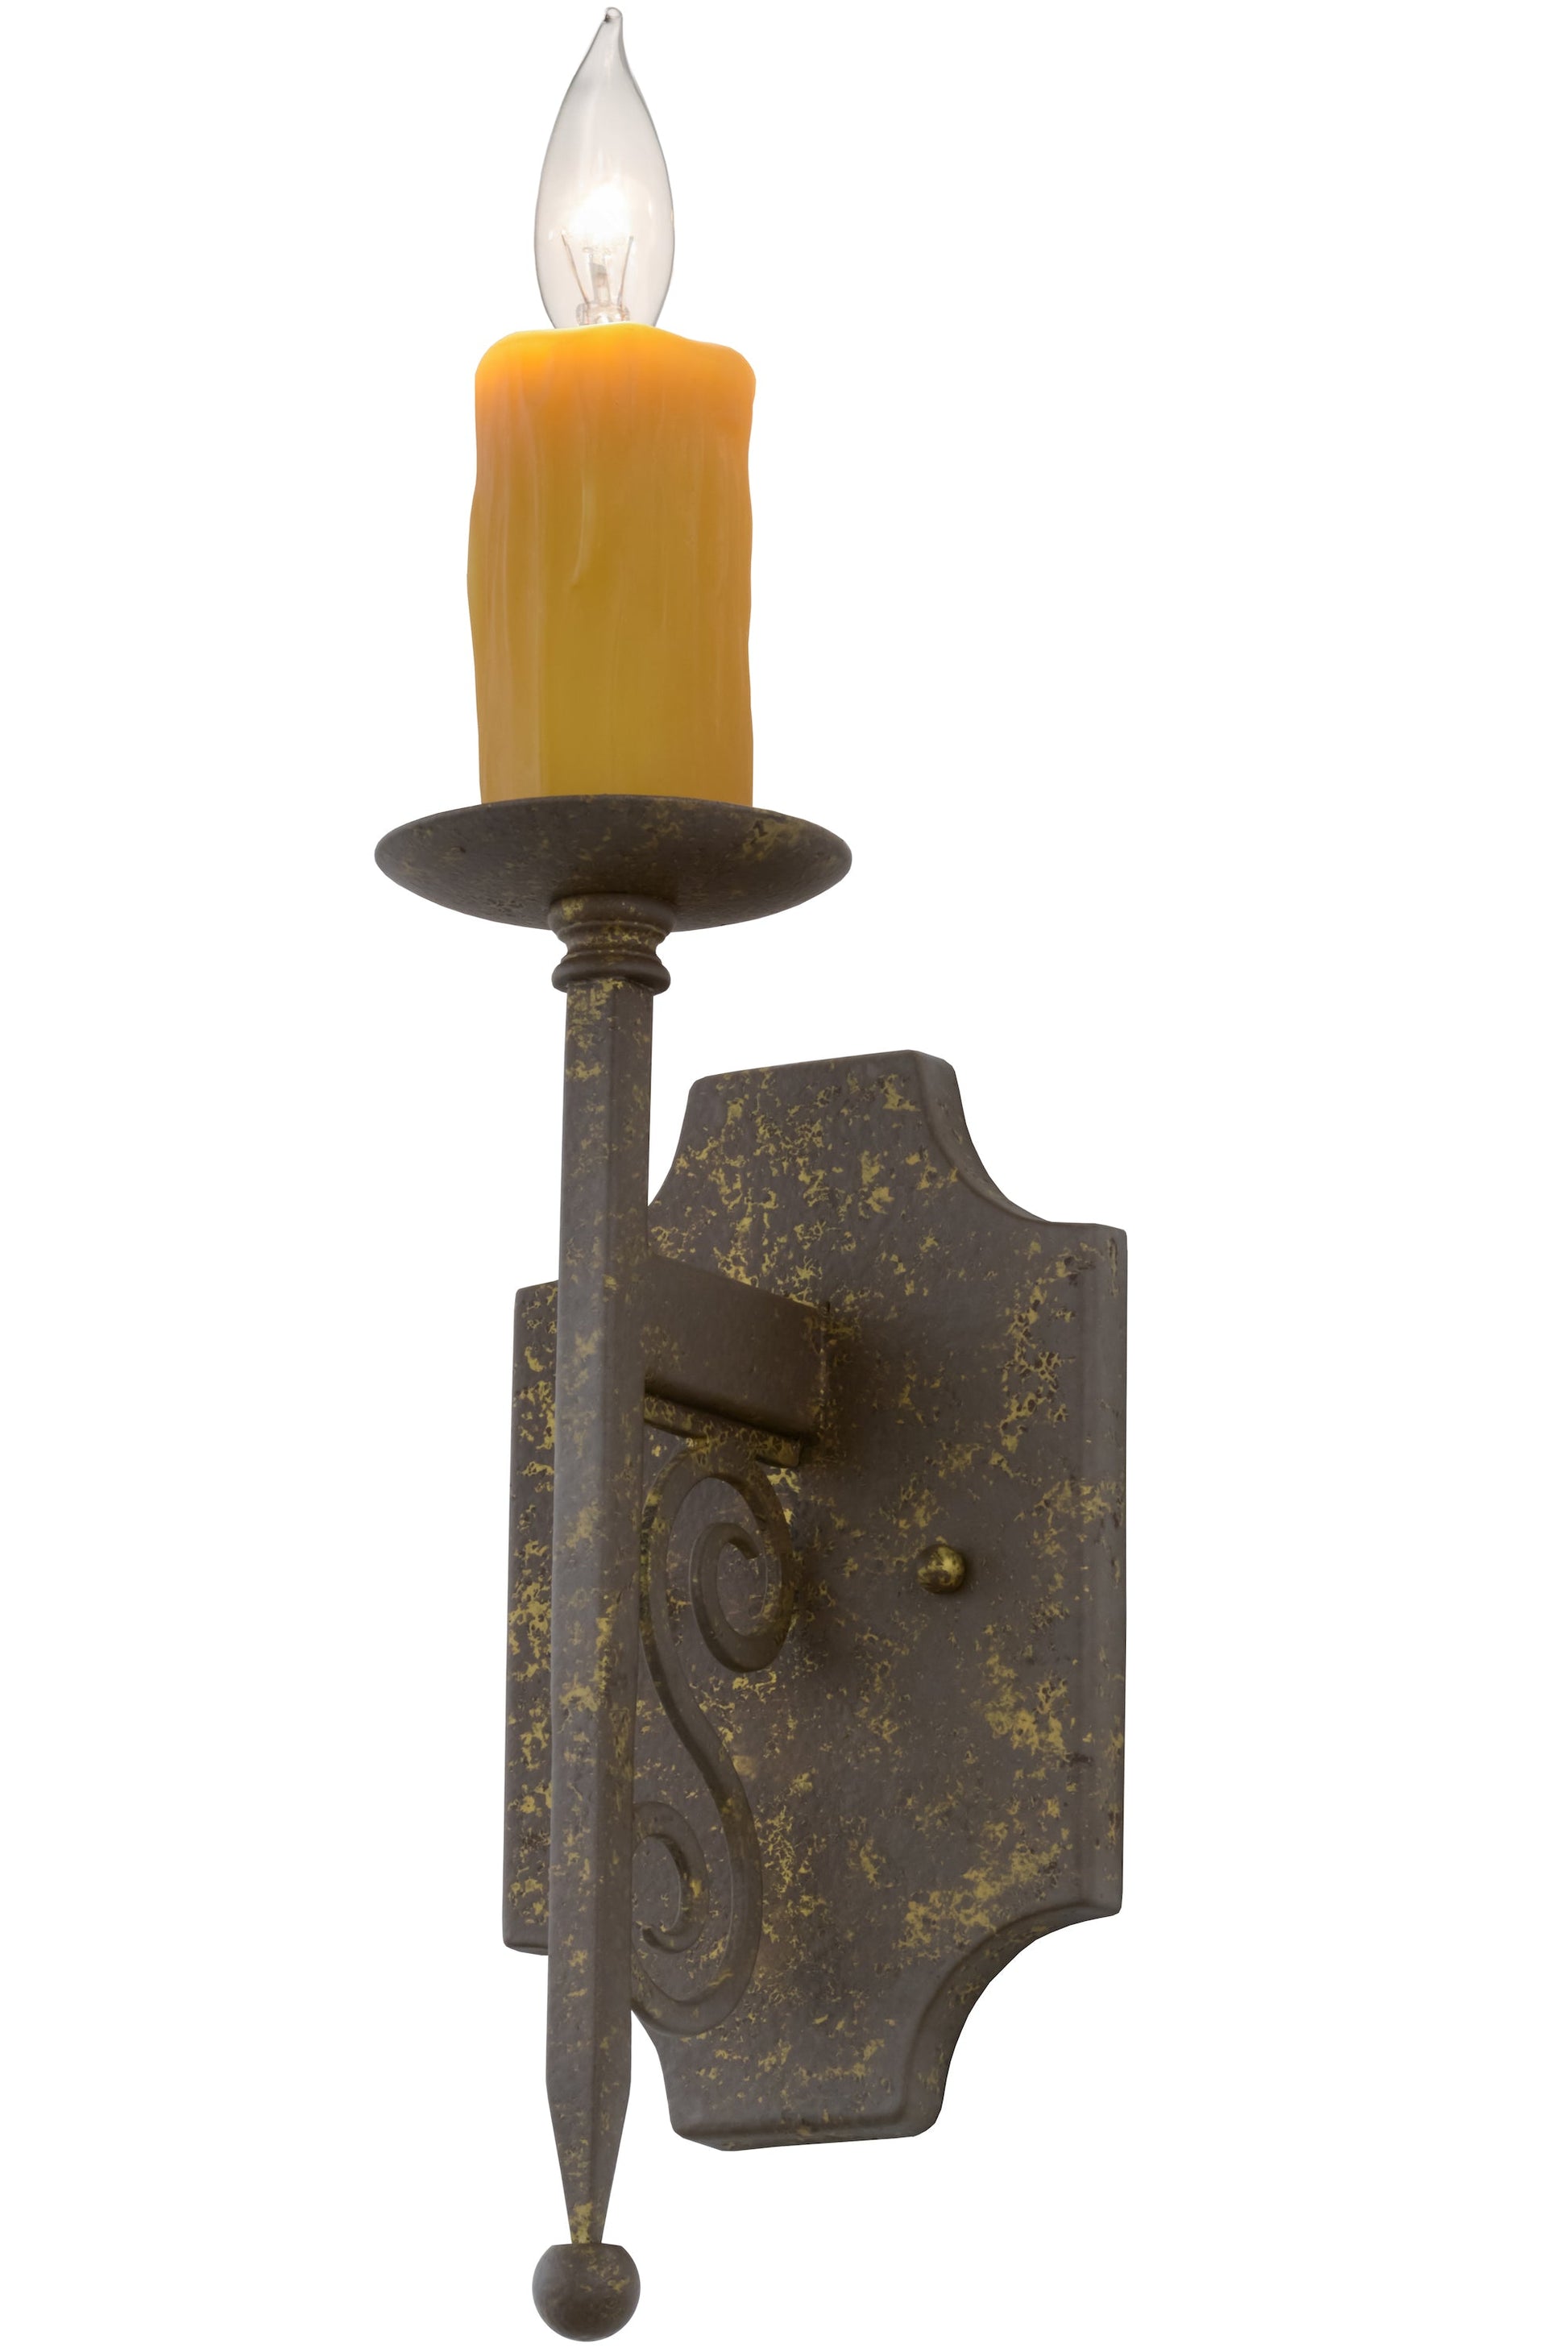 5" Toscano Wall Sconce by 2nd Ave Lighting